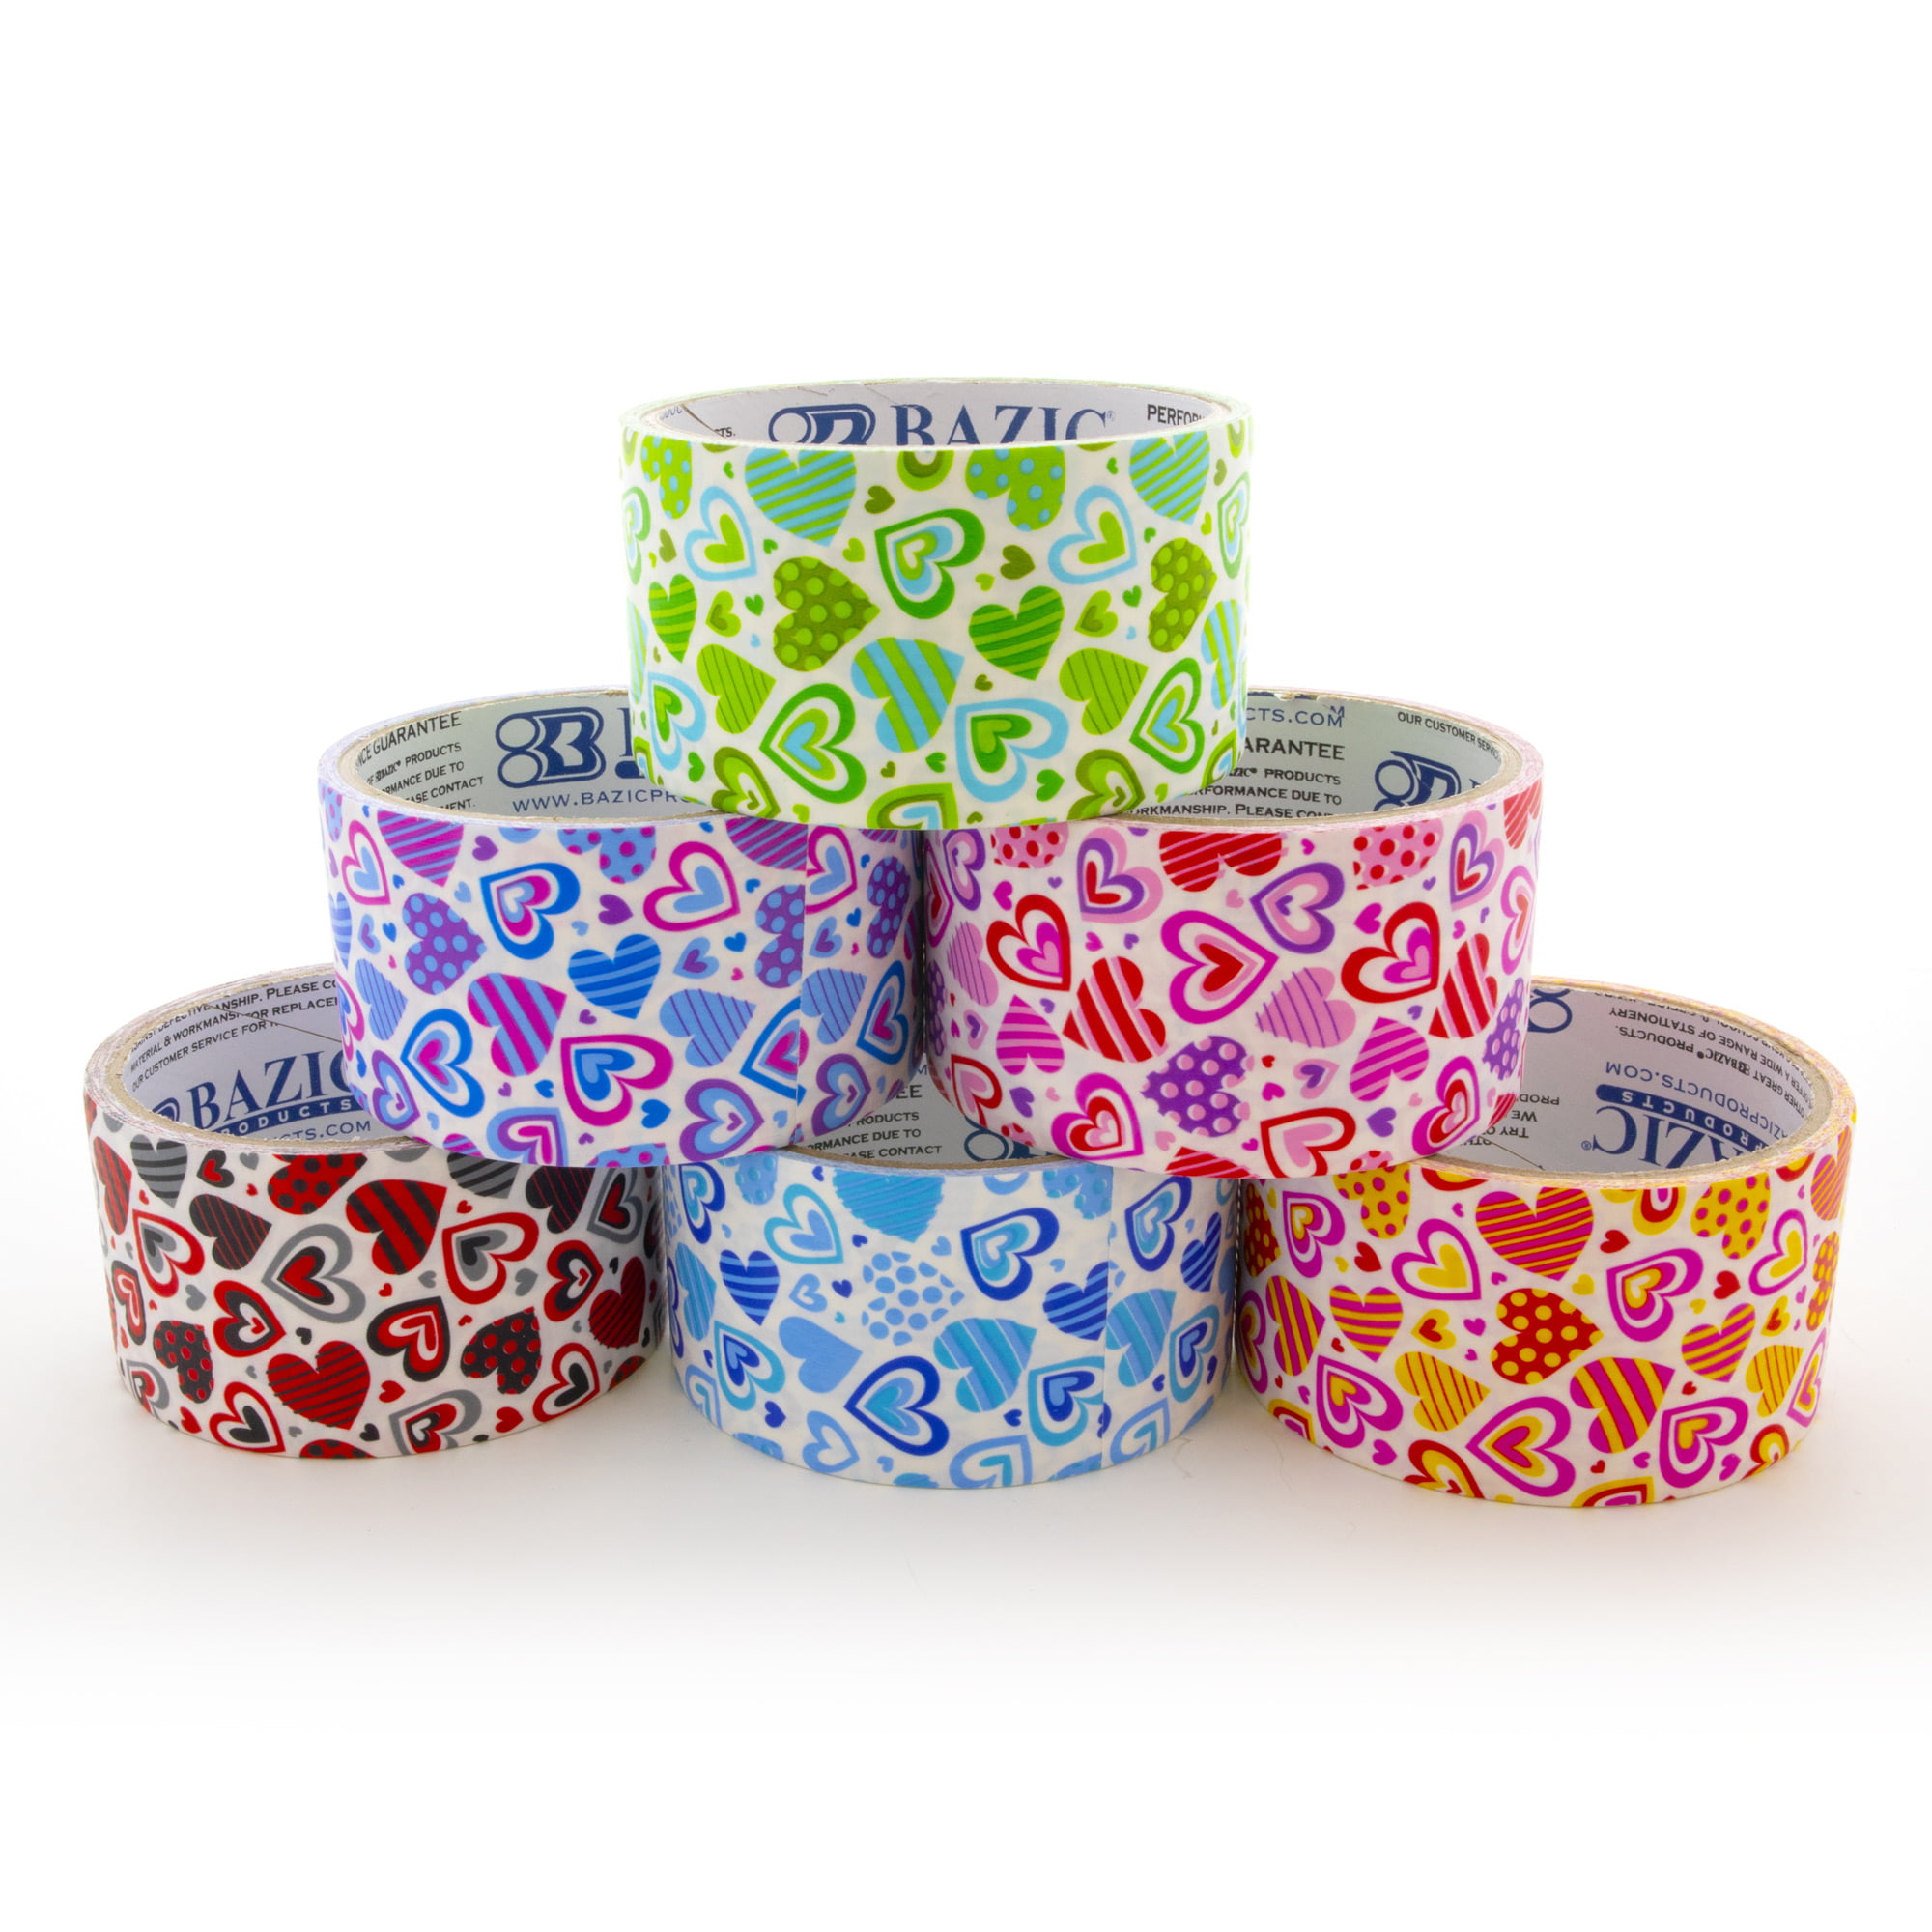 BAZIC Printed Duct Tape Butterfly Pattern 1.88 X 5 Yards, Colored Duct  Tape Designs Tape for Craft Art Decor Party DIY Christmas Gift Wapping,  6-Pack